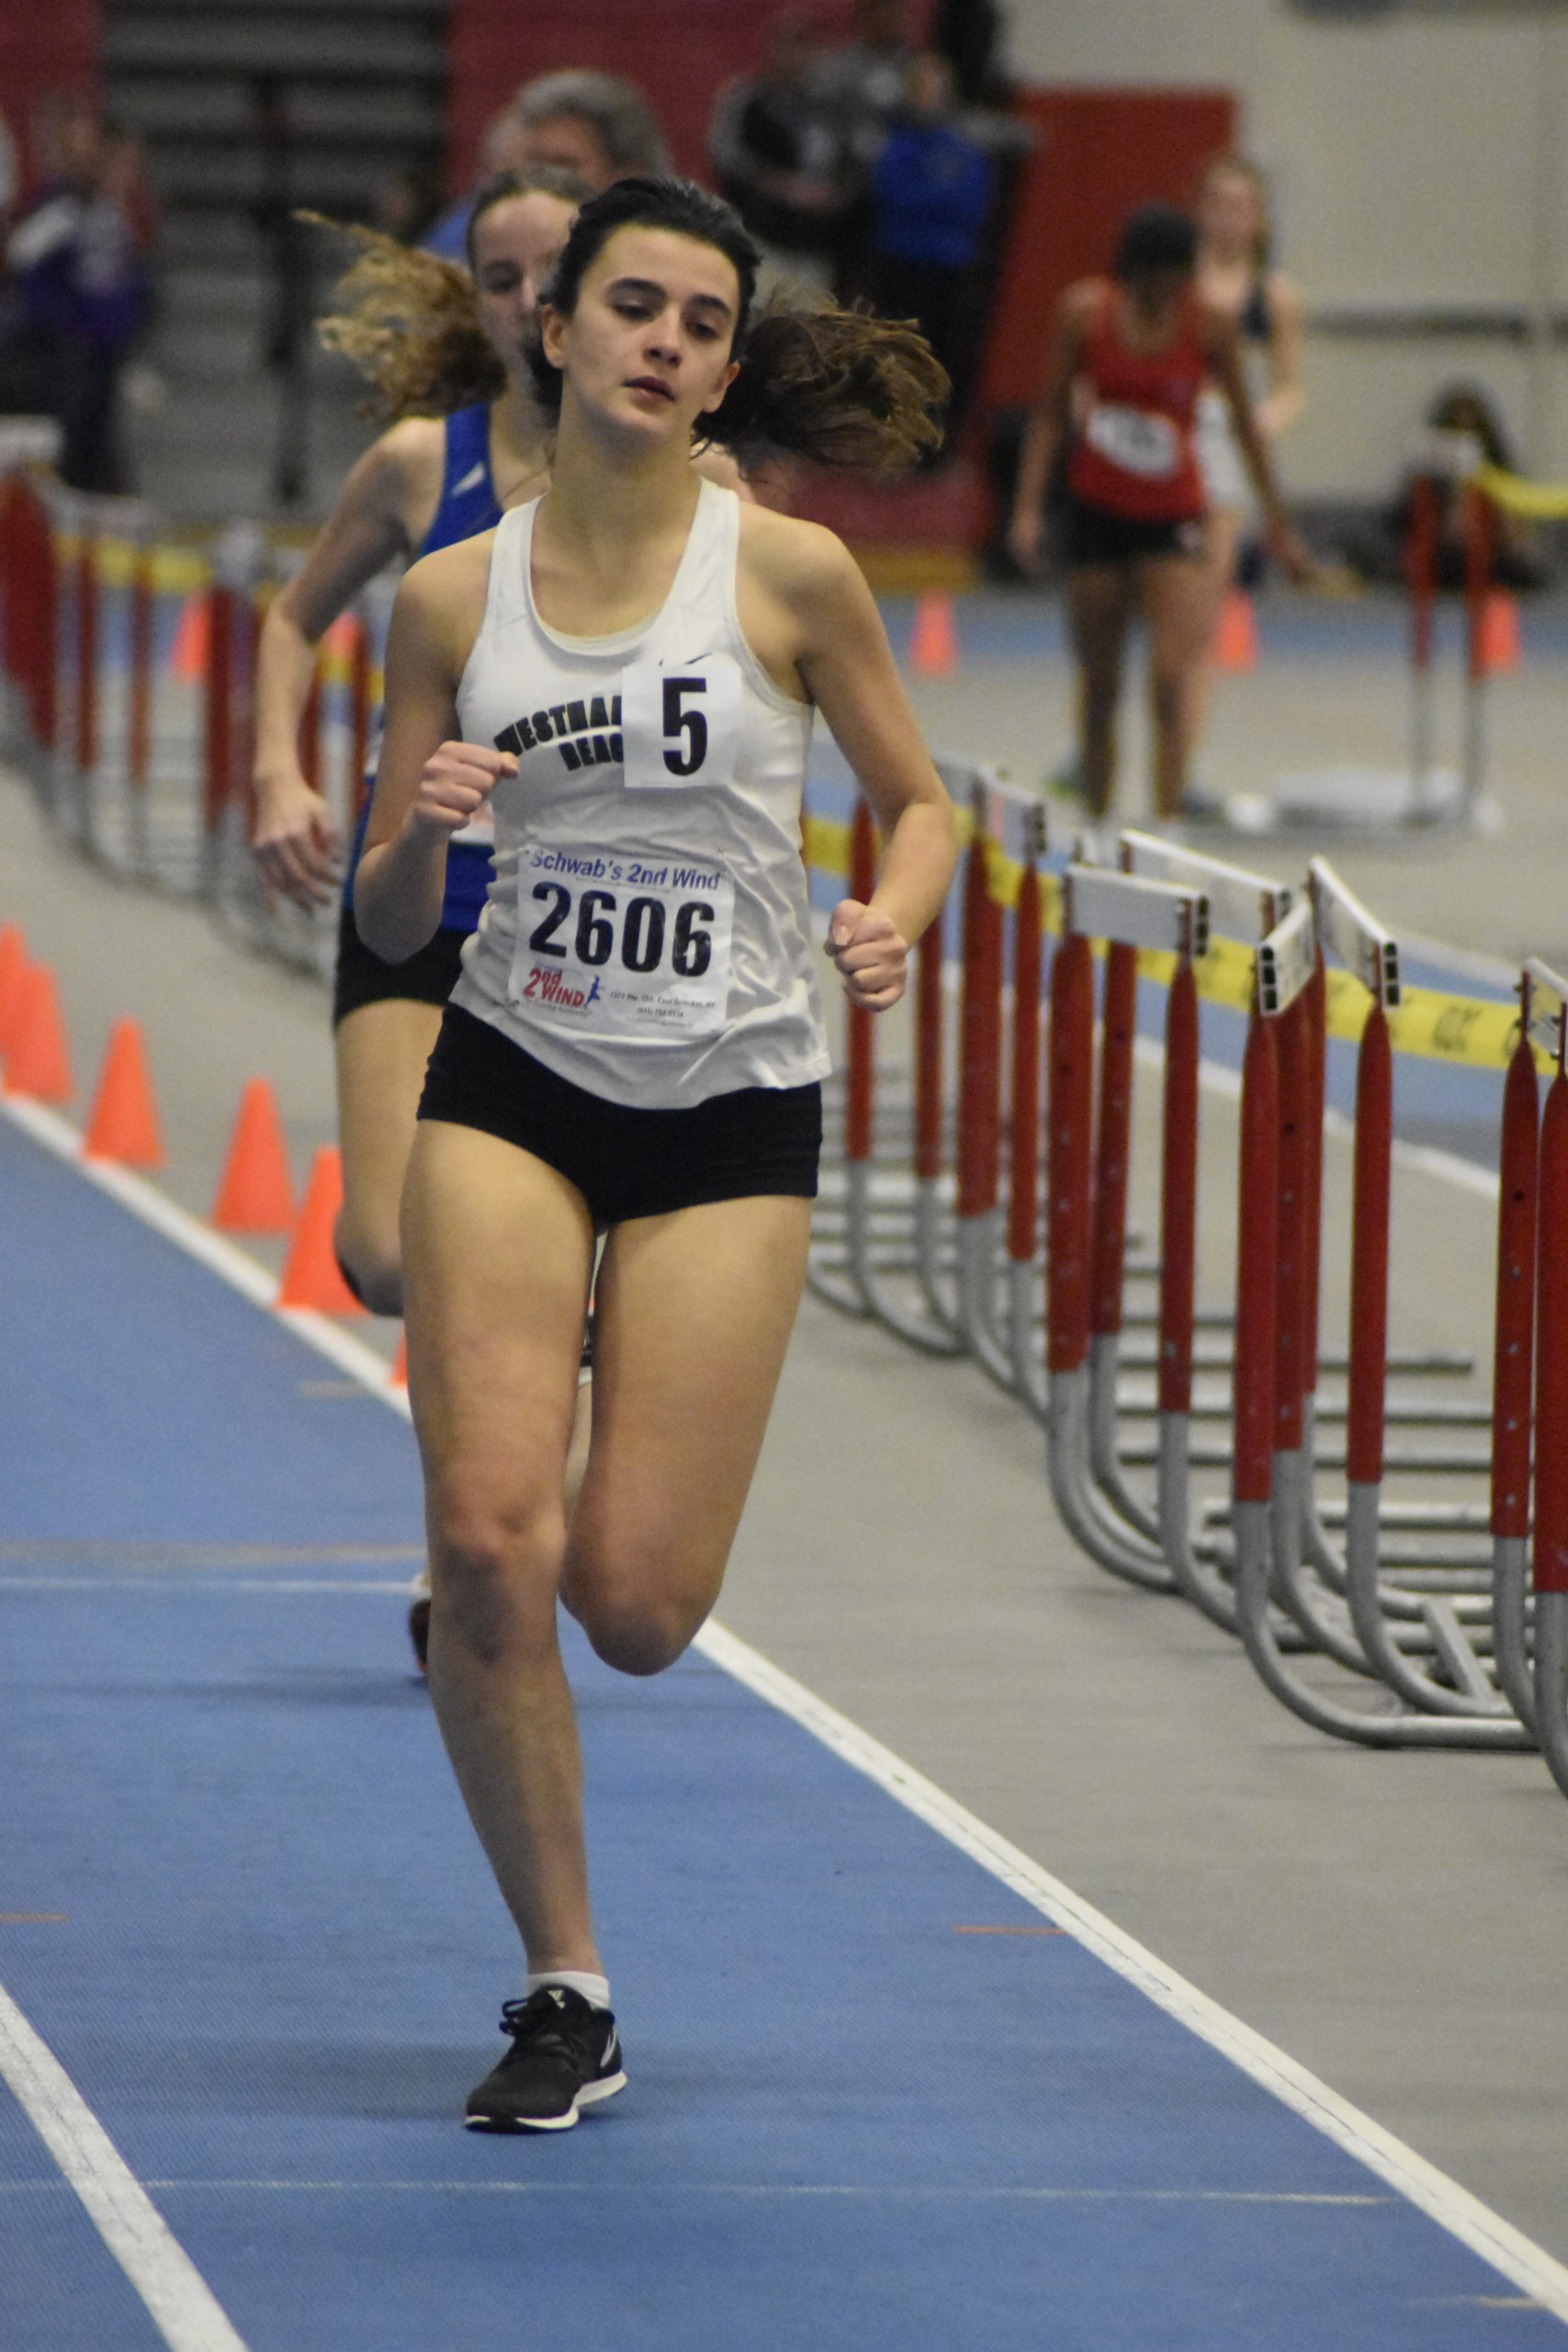 Anabelle Vellosa in the 600-meter run.